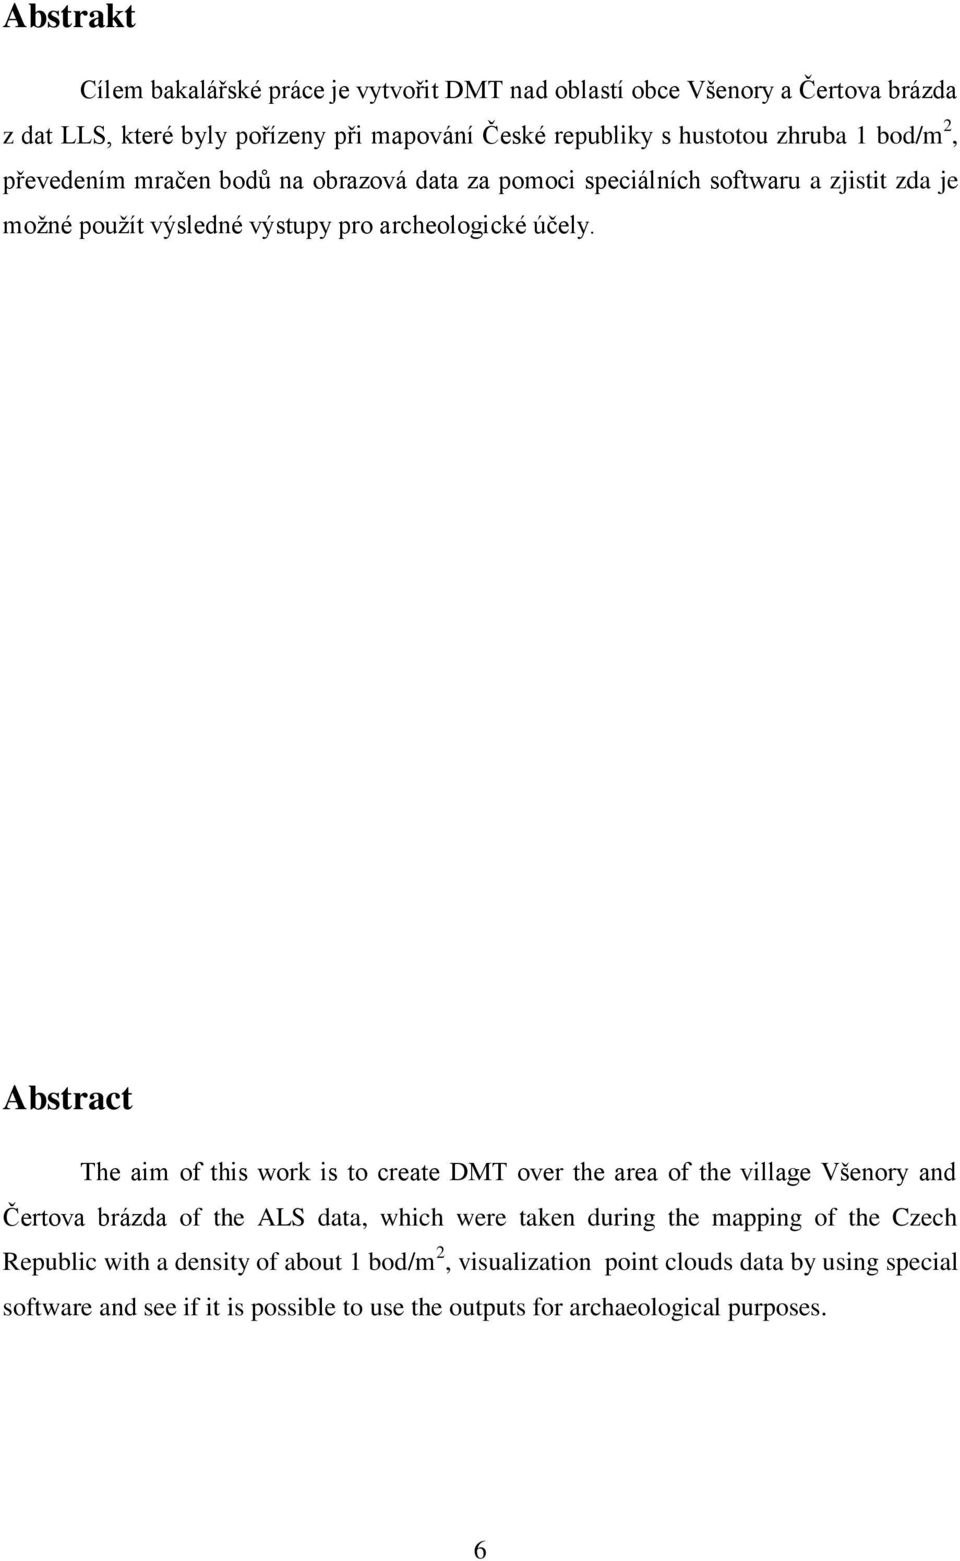 Abstract The aim of this work is to create DMT over the area of the village Všenory and Čertova brázda of the ALS data, which were taken during the mapping of the